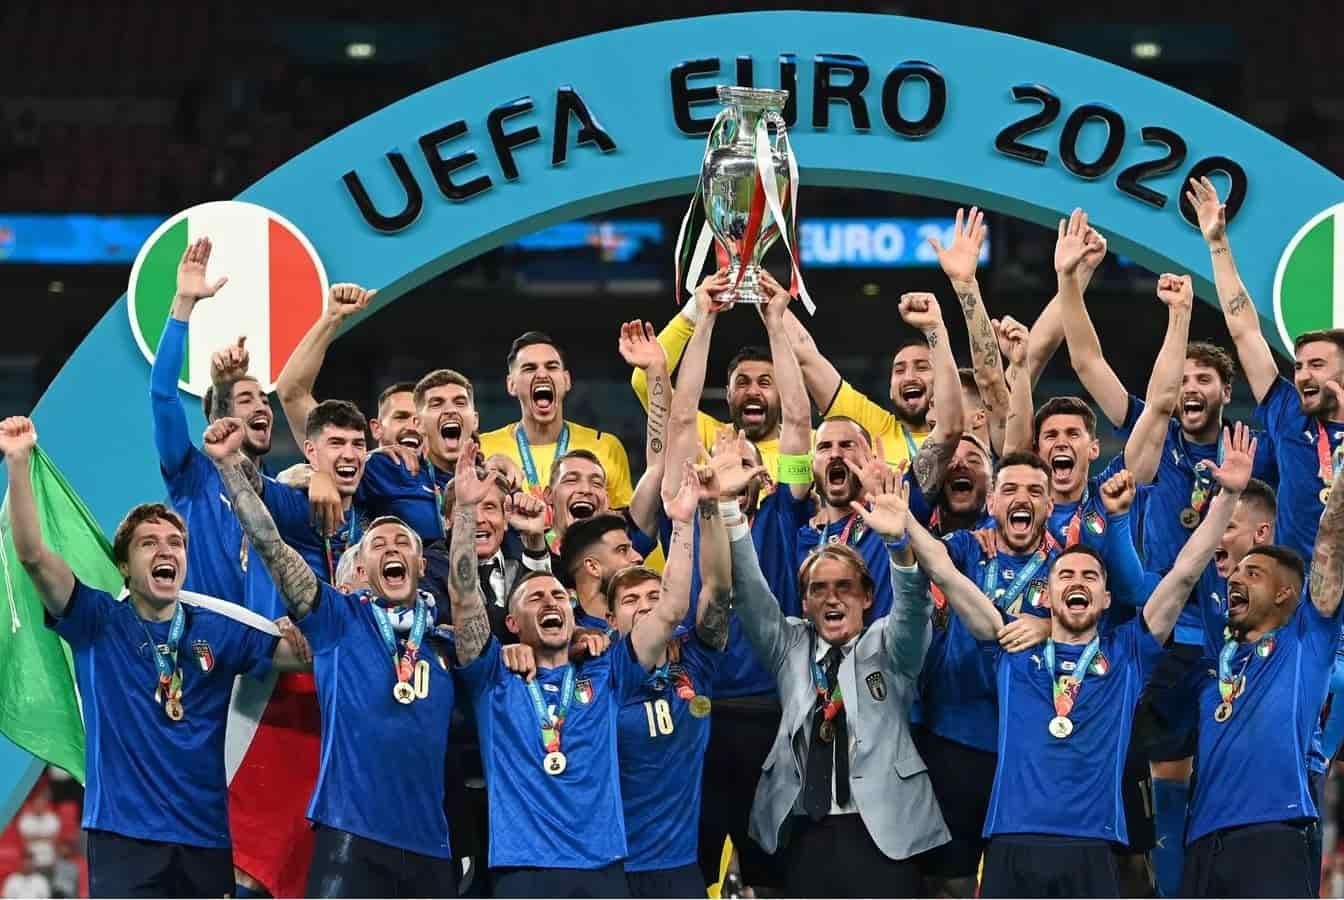 Italy fight back to win Euro 2020 in England, remain unbeated in 34 matches